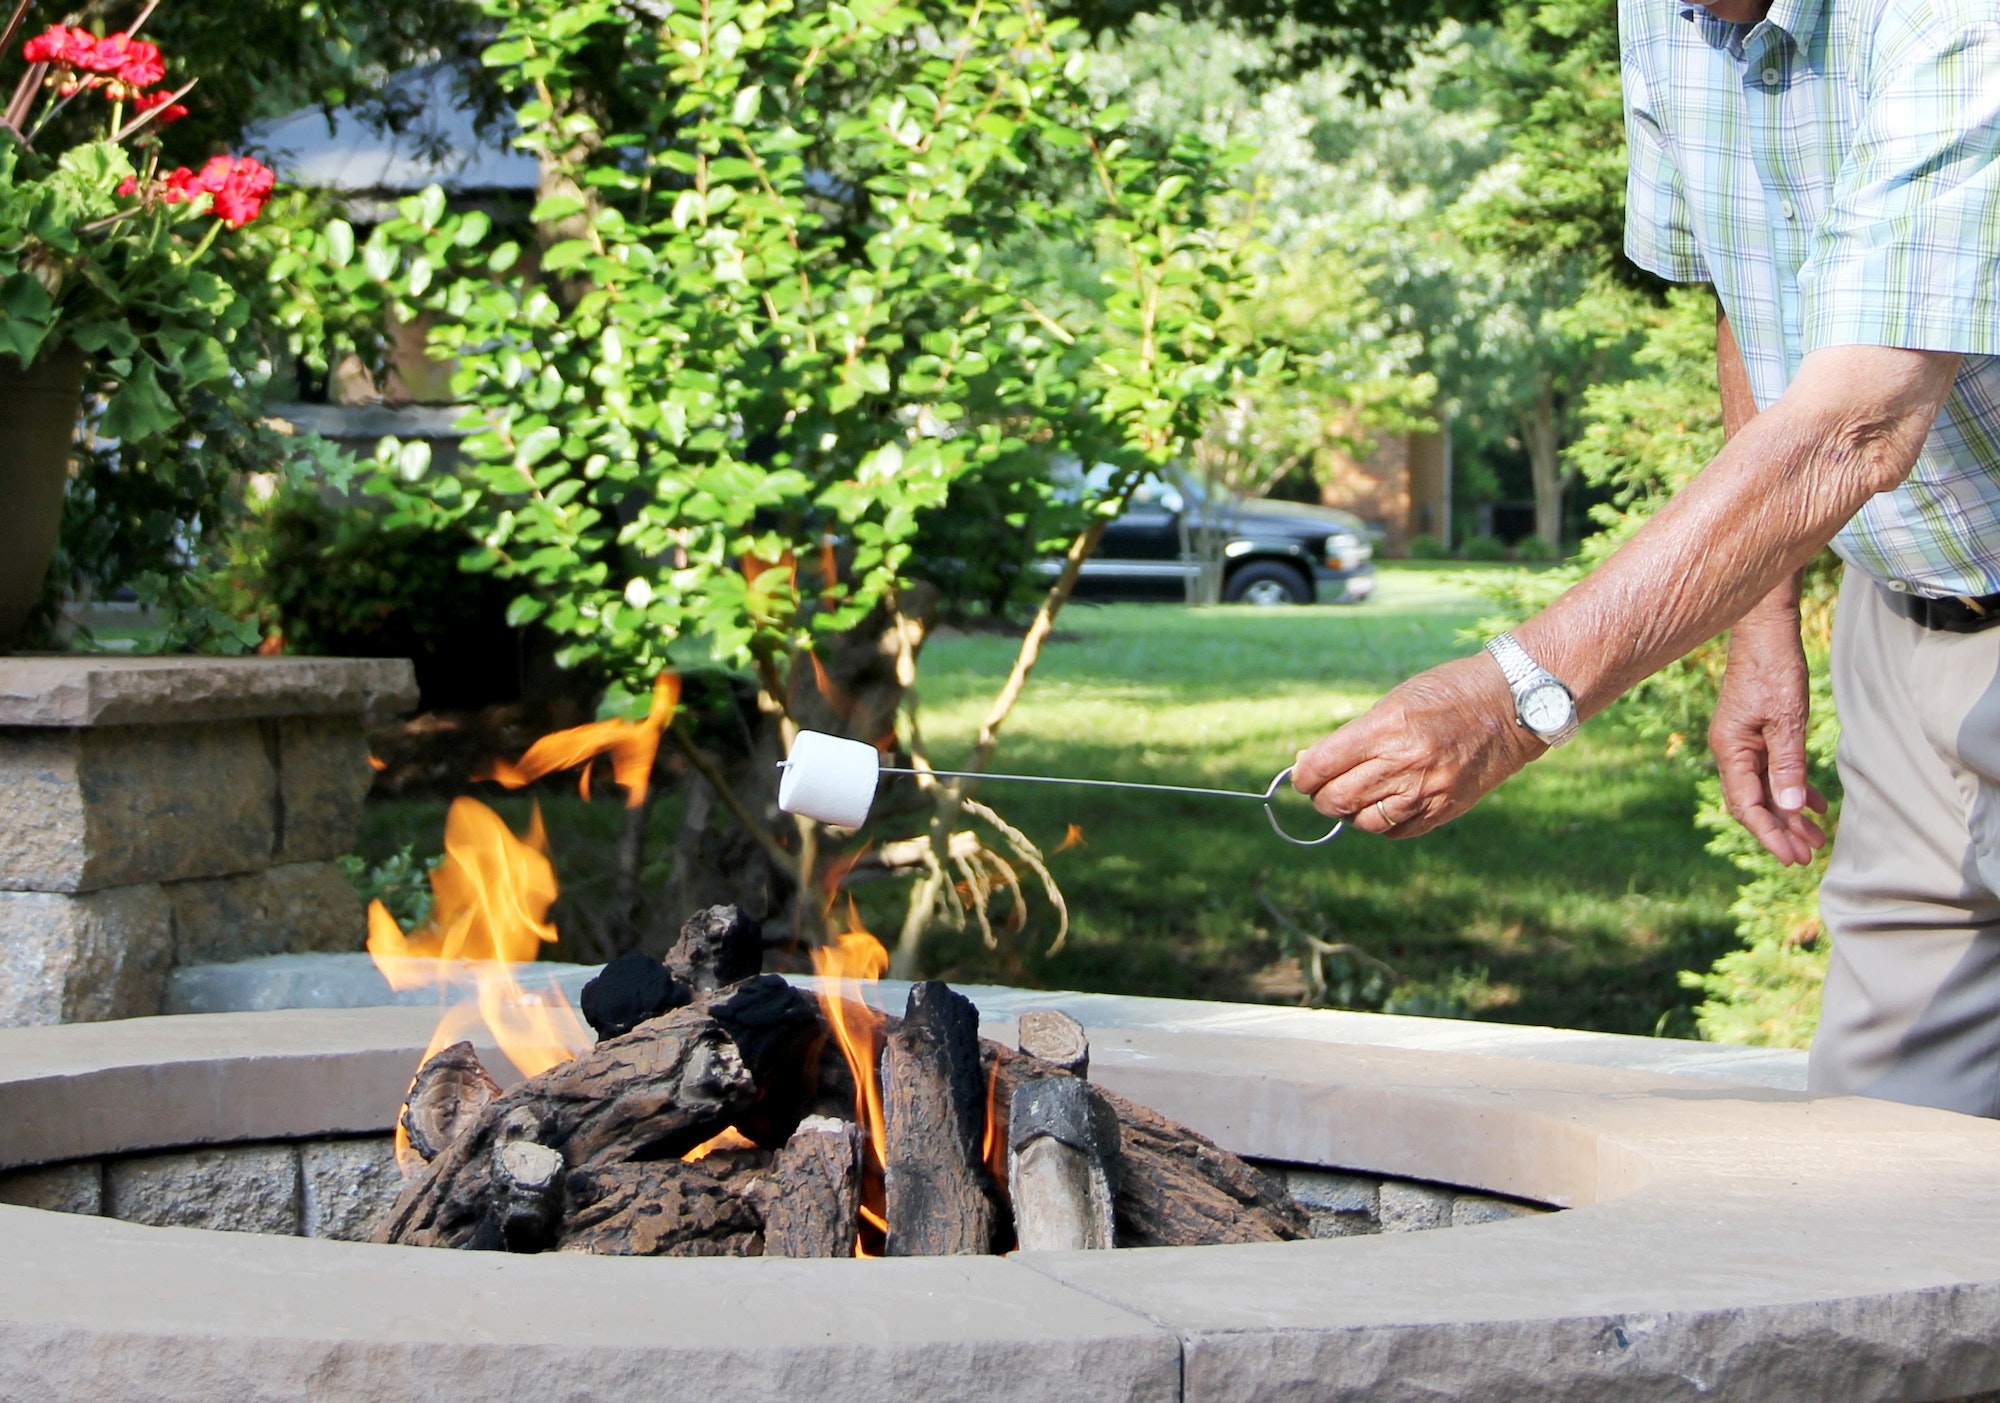 Elderly man in the backyard enjoying the fire pit & marshmallows during an outdoor gathering.